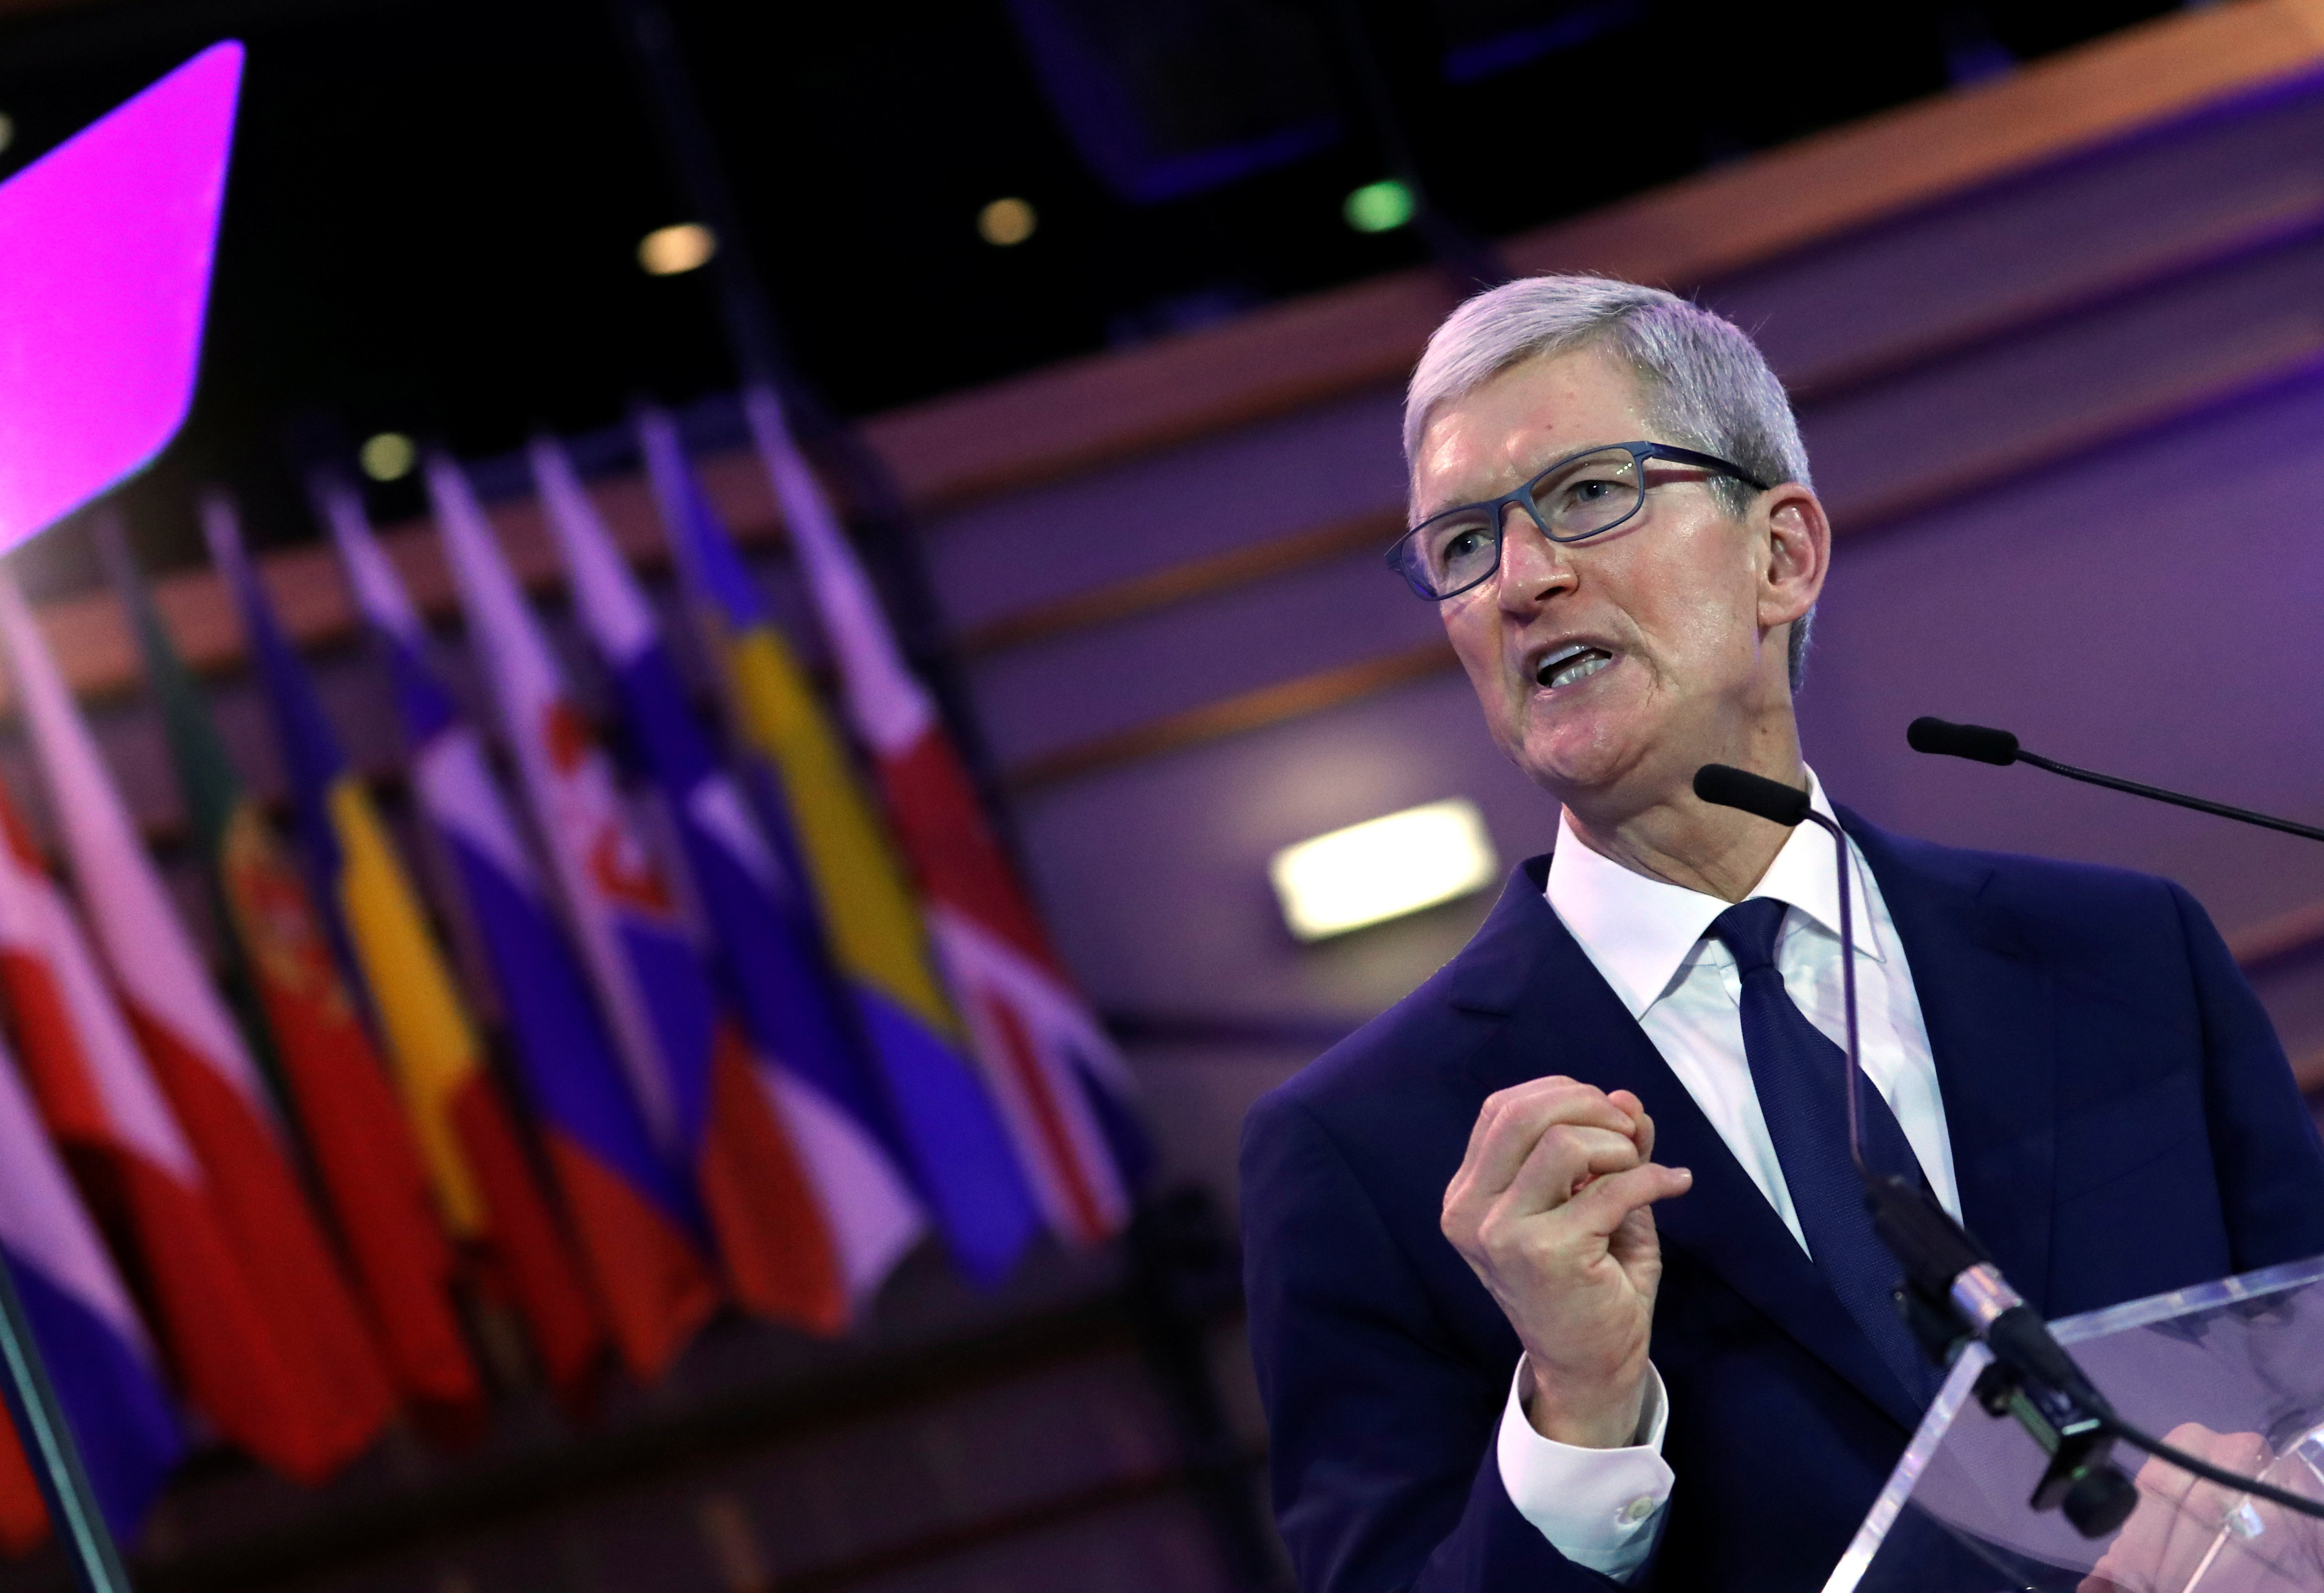 Apple CEO Tim Cook delivers a keynote during the European Union's privacy conference at the EU Parliament in Brussels, Belgium October 24, 2018. REUTERS/Yves Herman